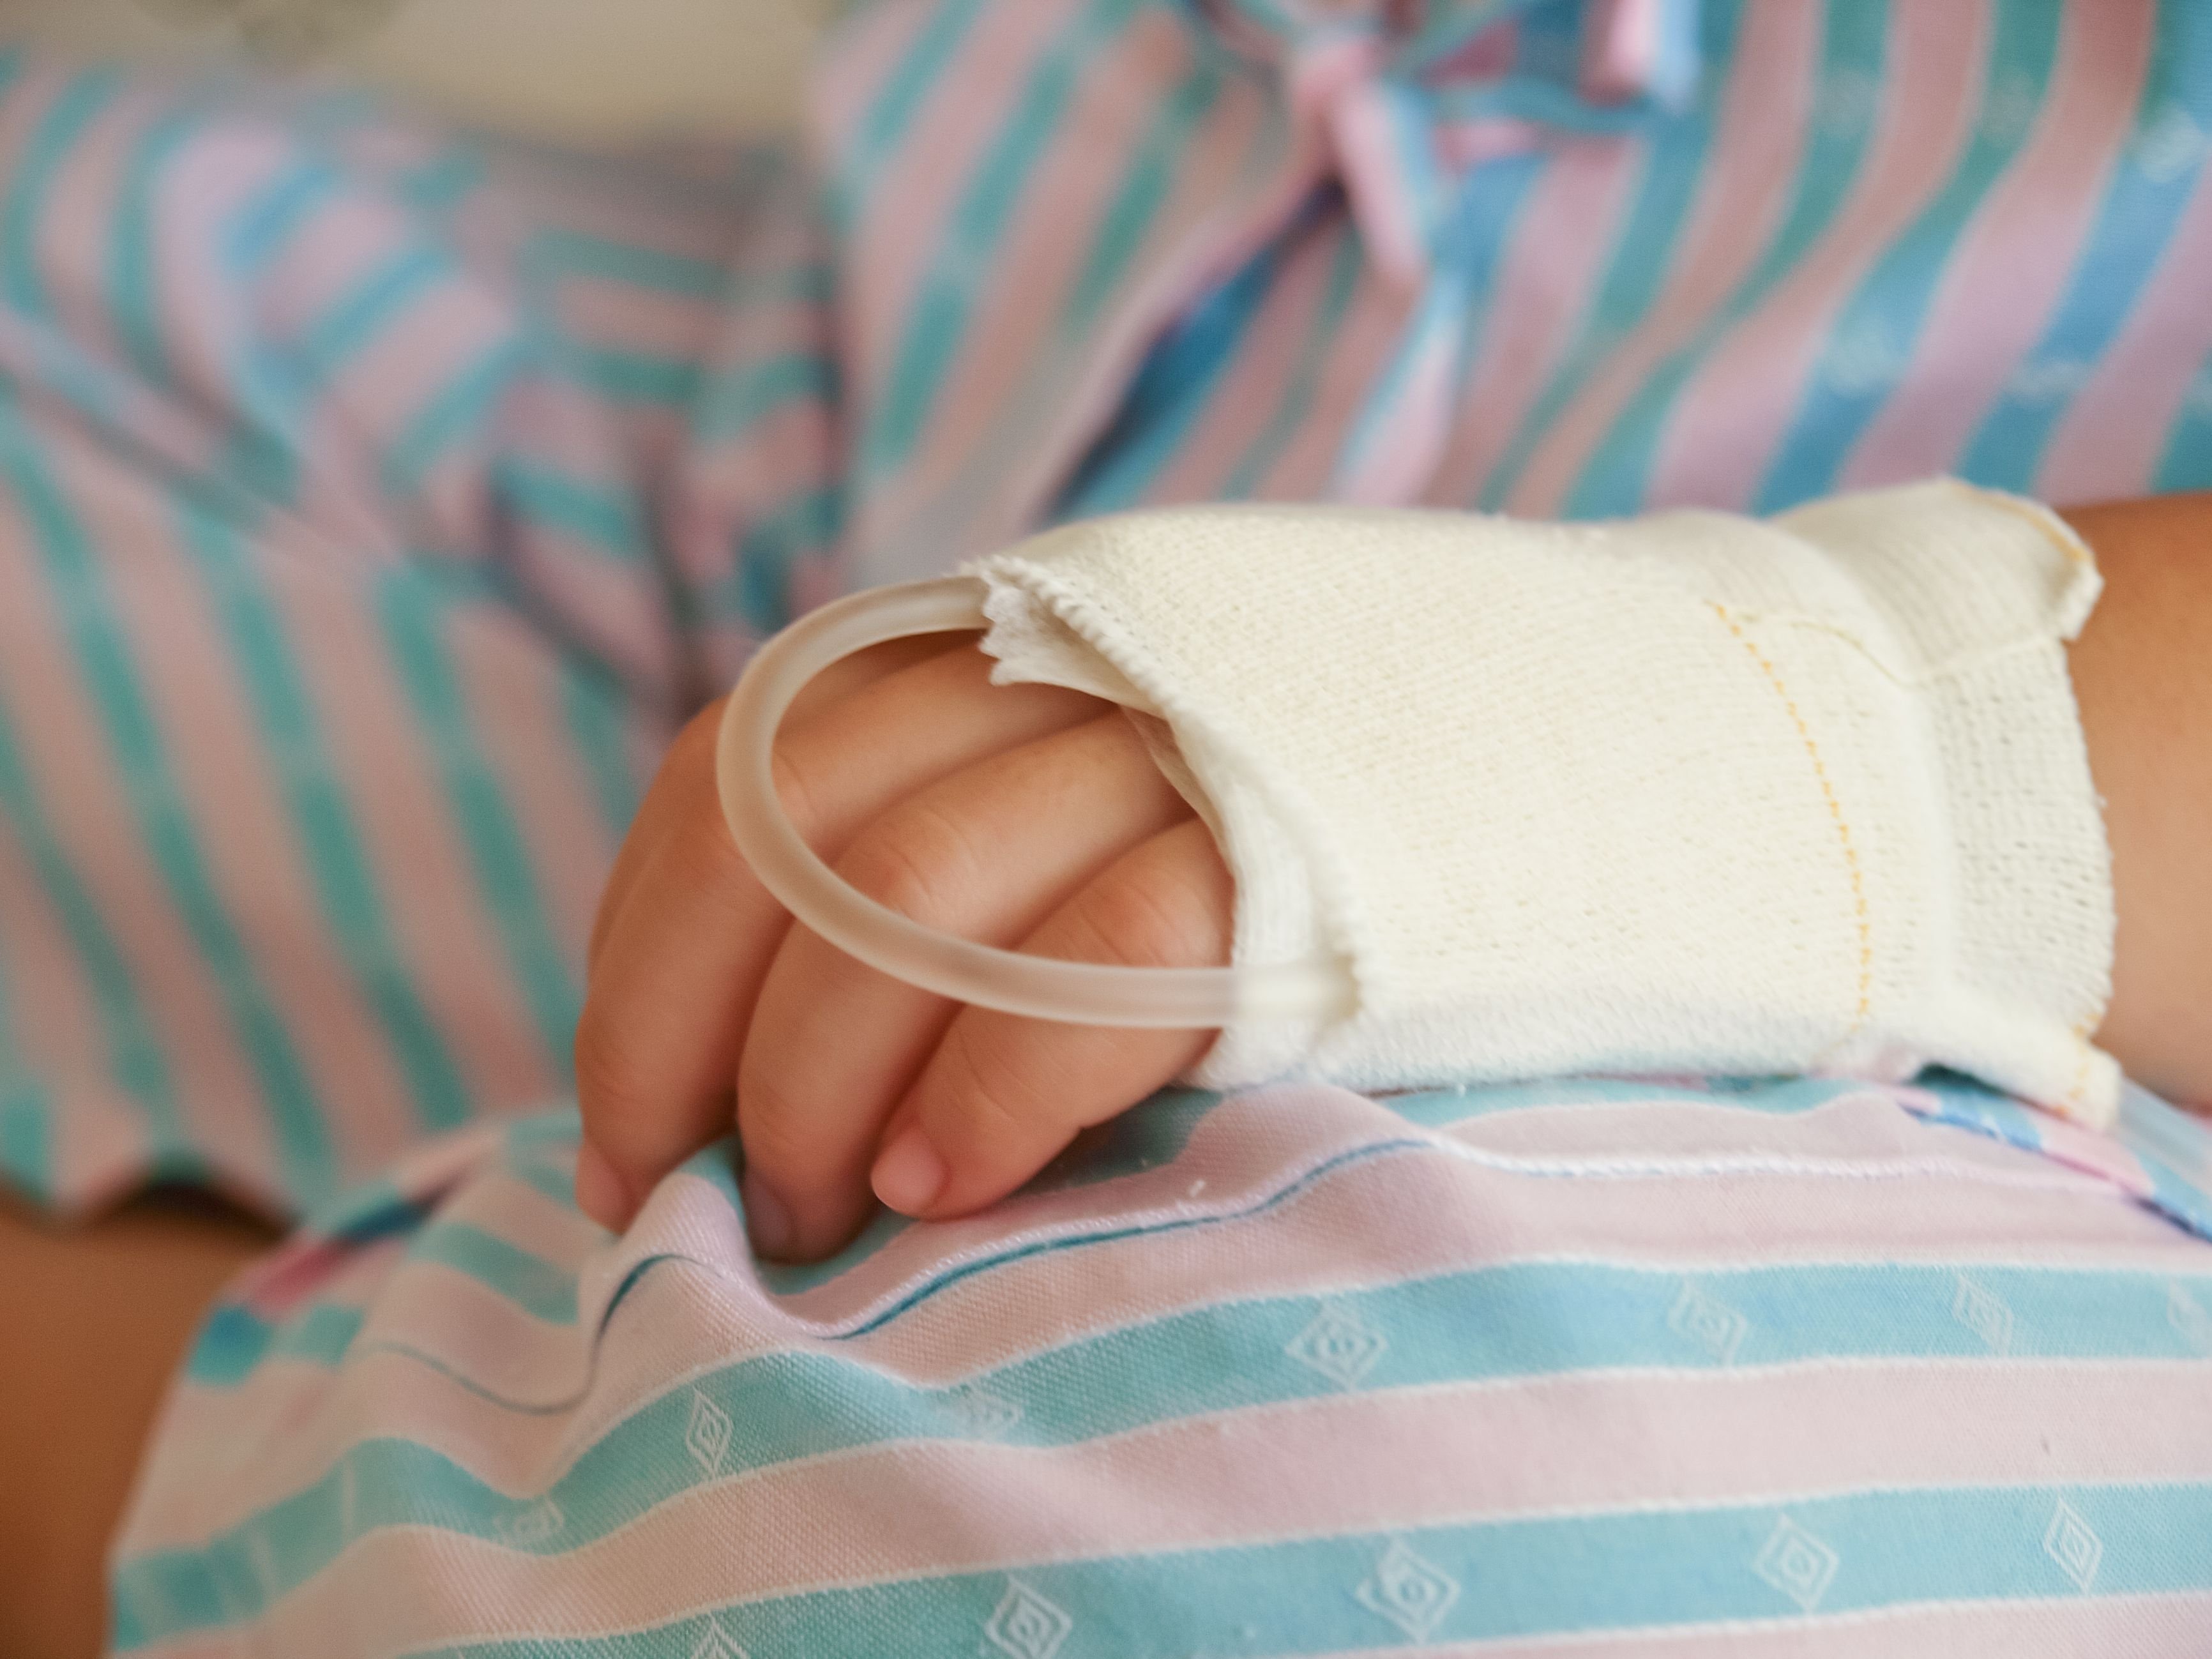 A sick child in the hospital with a dextrose on the hand. | Source: Shutterstock